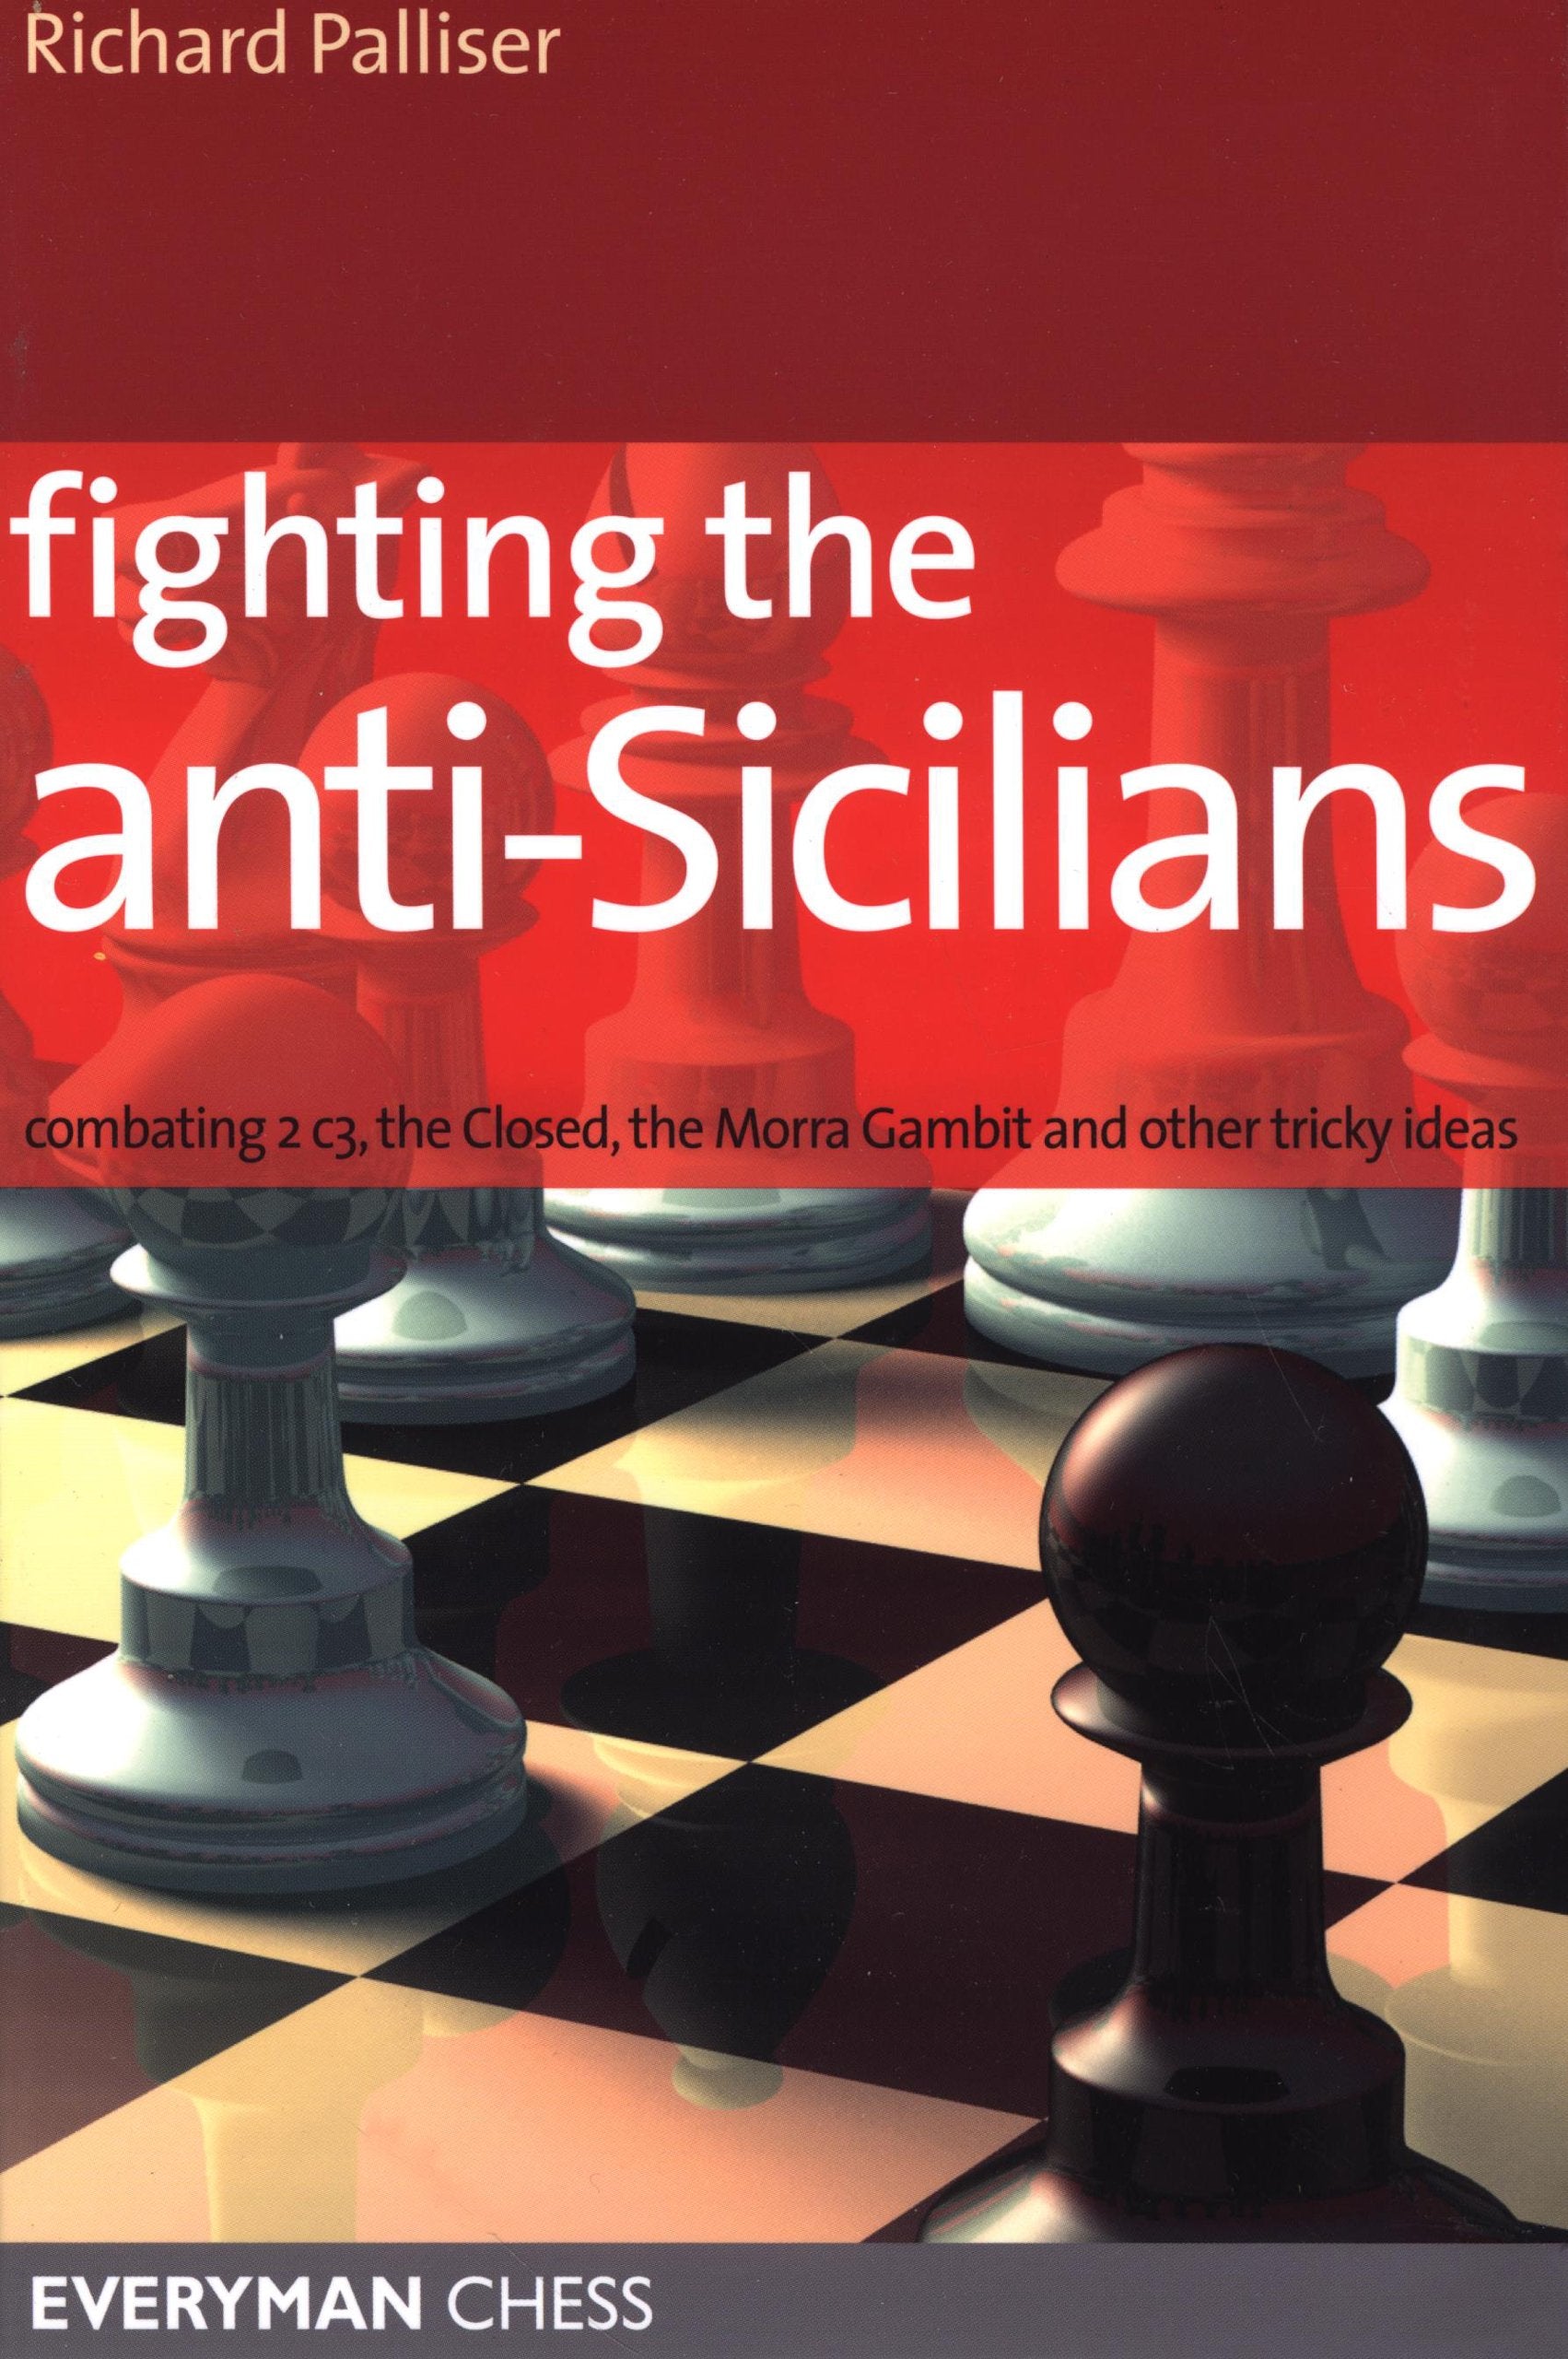 Fighting the Anti-Sicilians: Combating 2 c3, the Closed, the Morra Gambit  and other tricky ideas by Richard Palliser – Everyman Chess